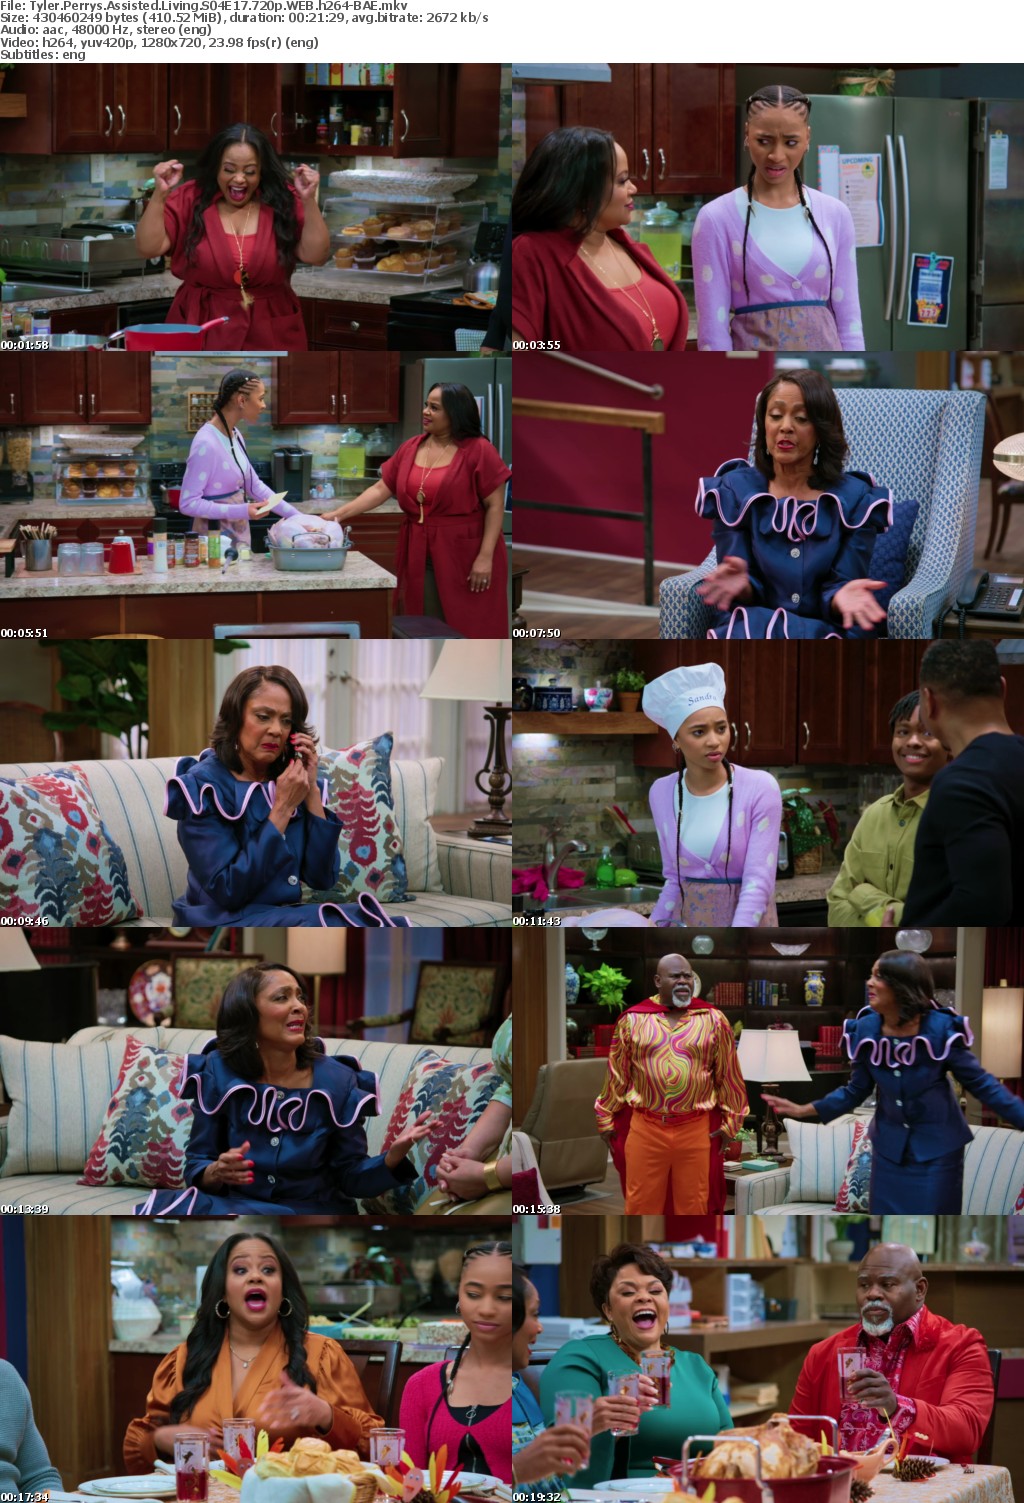 Tyler Perrys Assisted Living S04E17 720p WEB h264-BAE